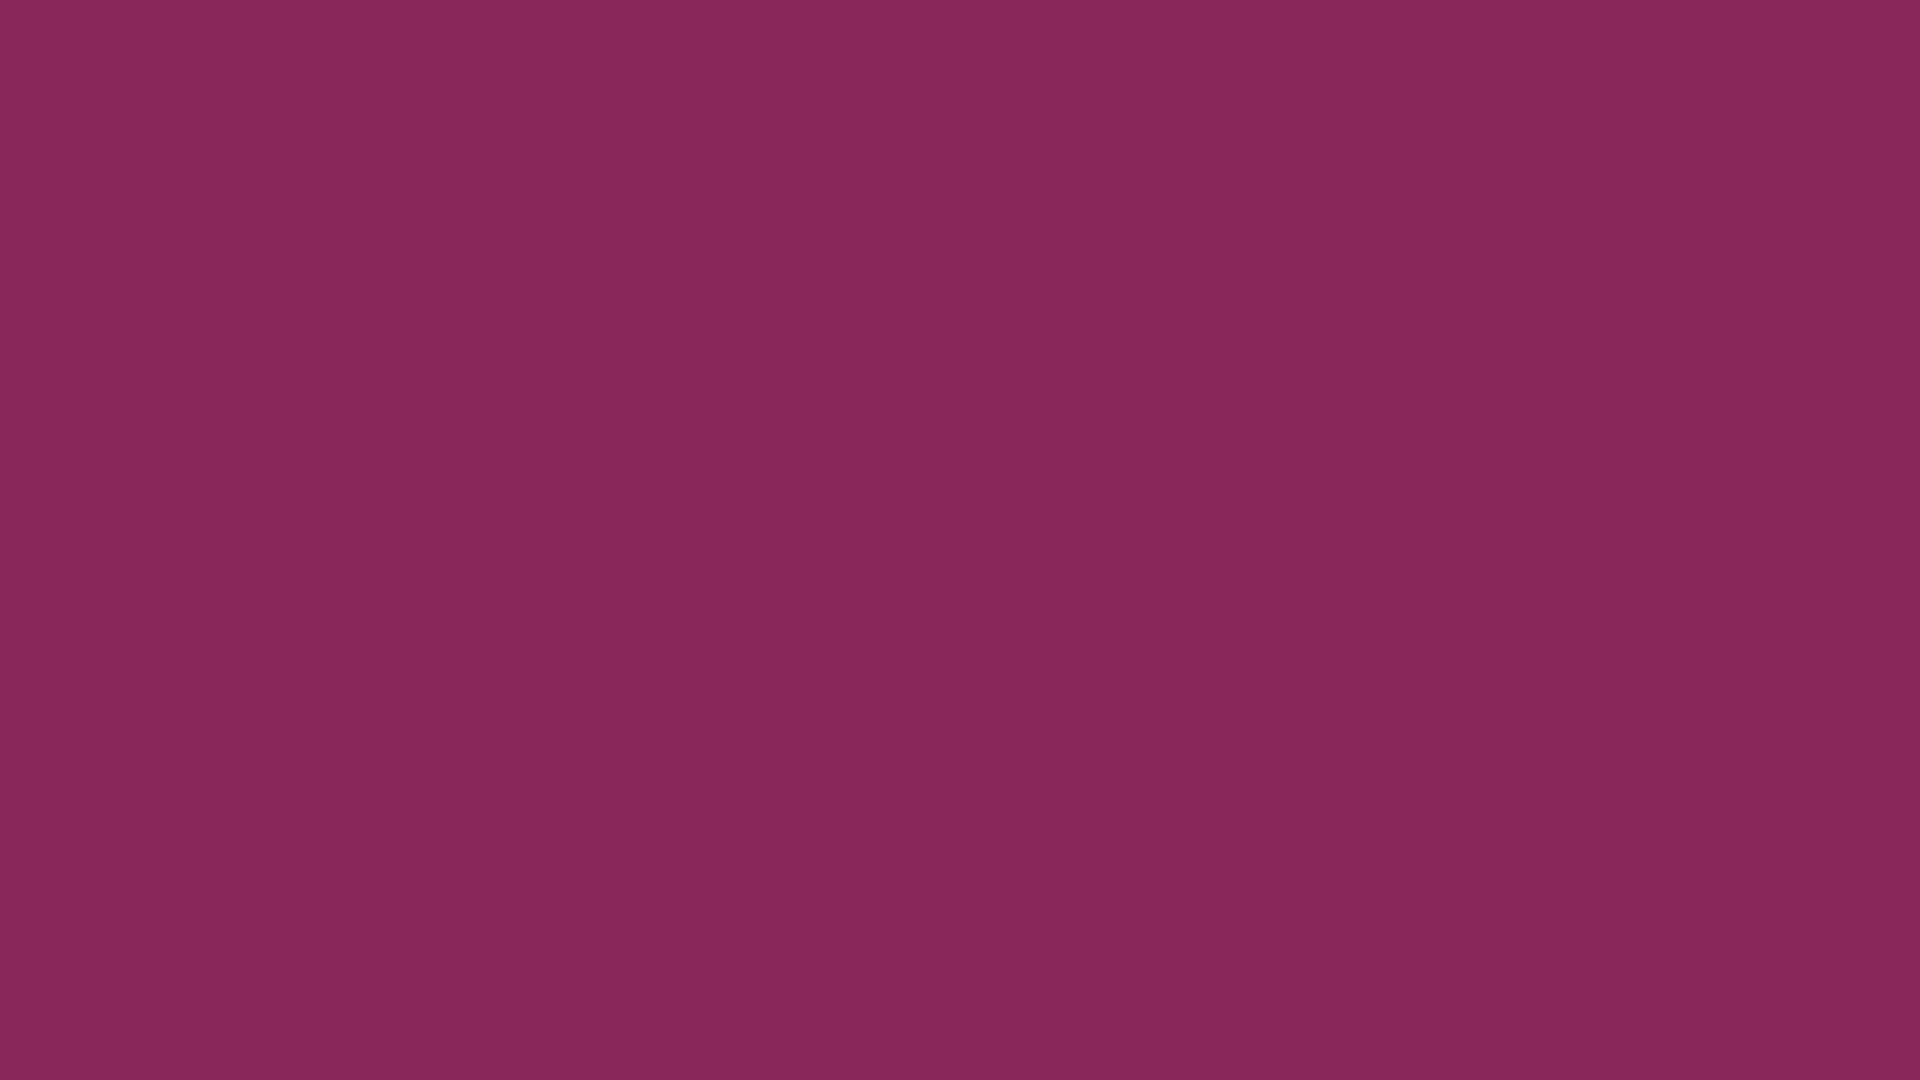 Free 1920x1080 resolution Dark Raspberry solid color background view 1920x1080